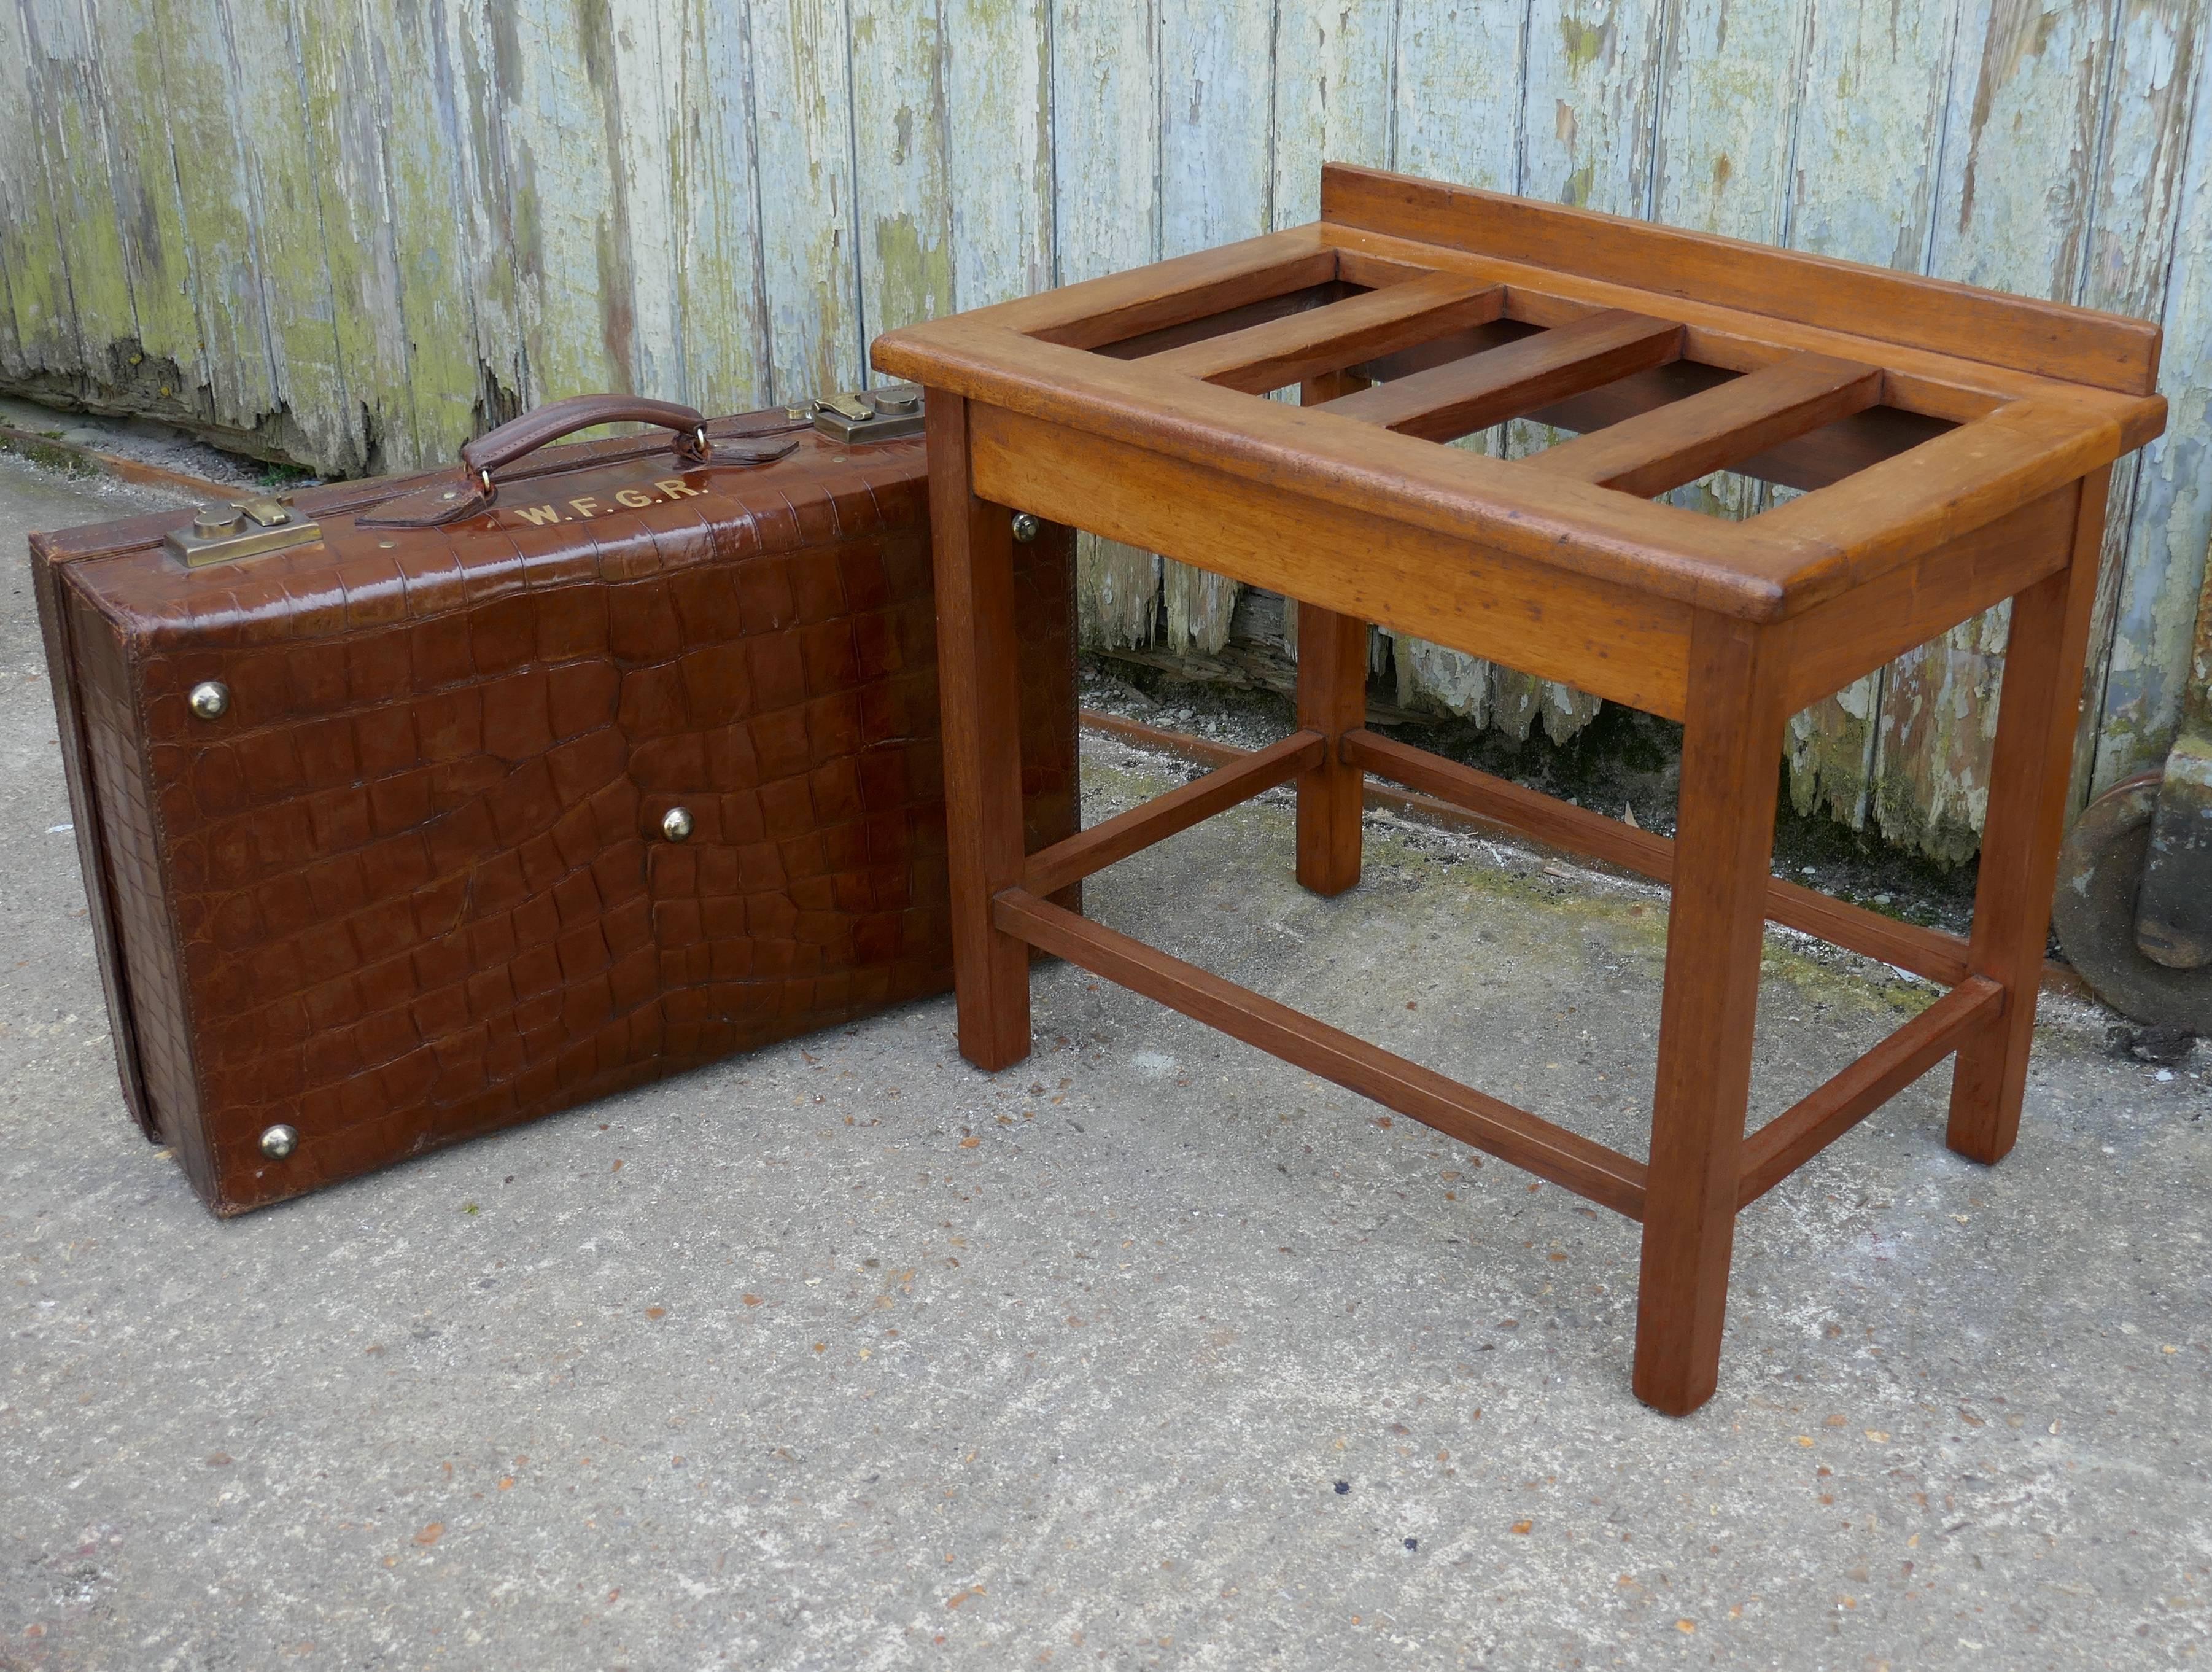 This is a good sturdy piece, it is in mahogany which has a natural bleached patina, it has sleek square lines, the stand is very robust and will take the weight of several suit cases, it has a small gallery at the back
We do have several suitcase